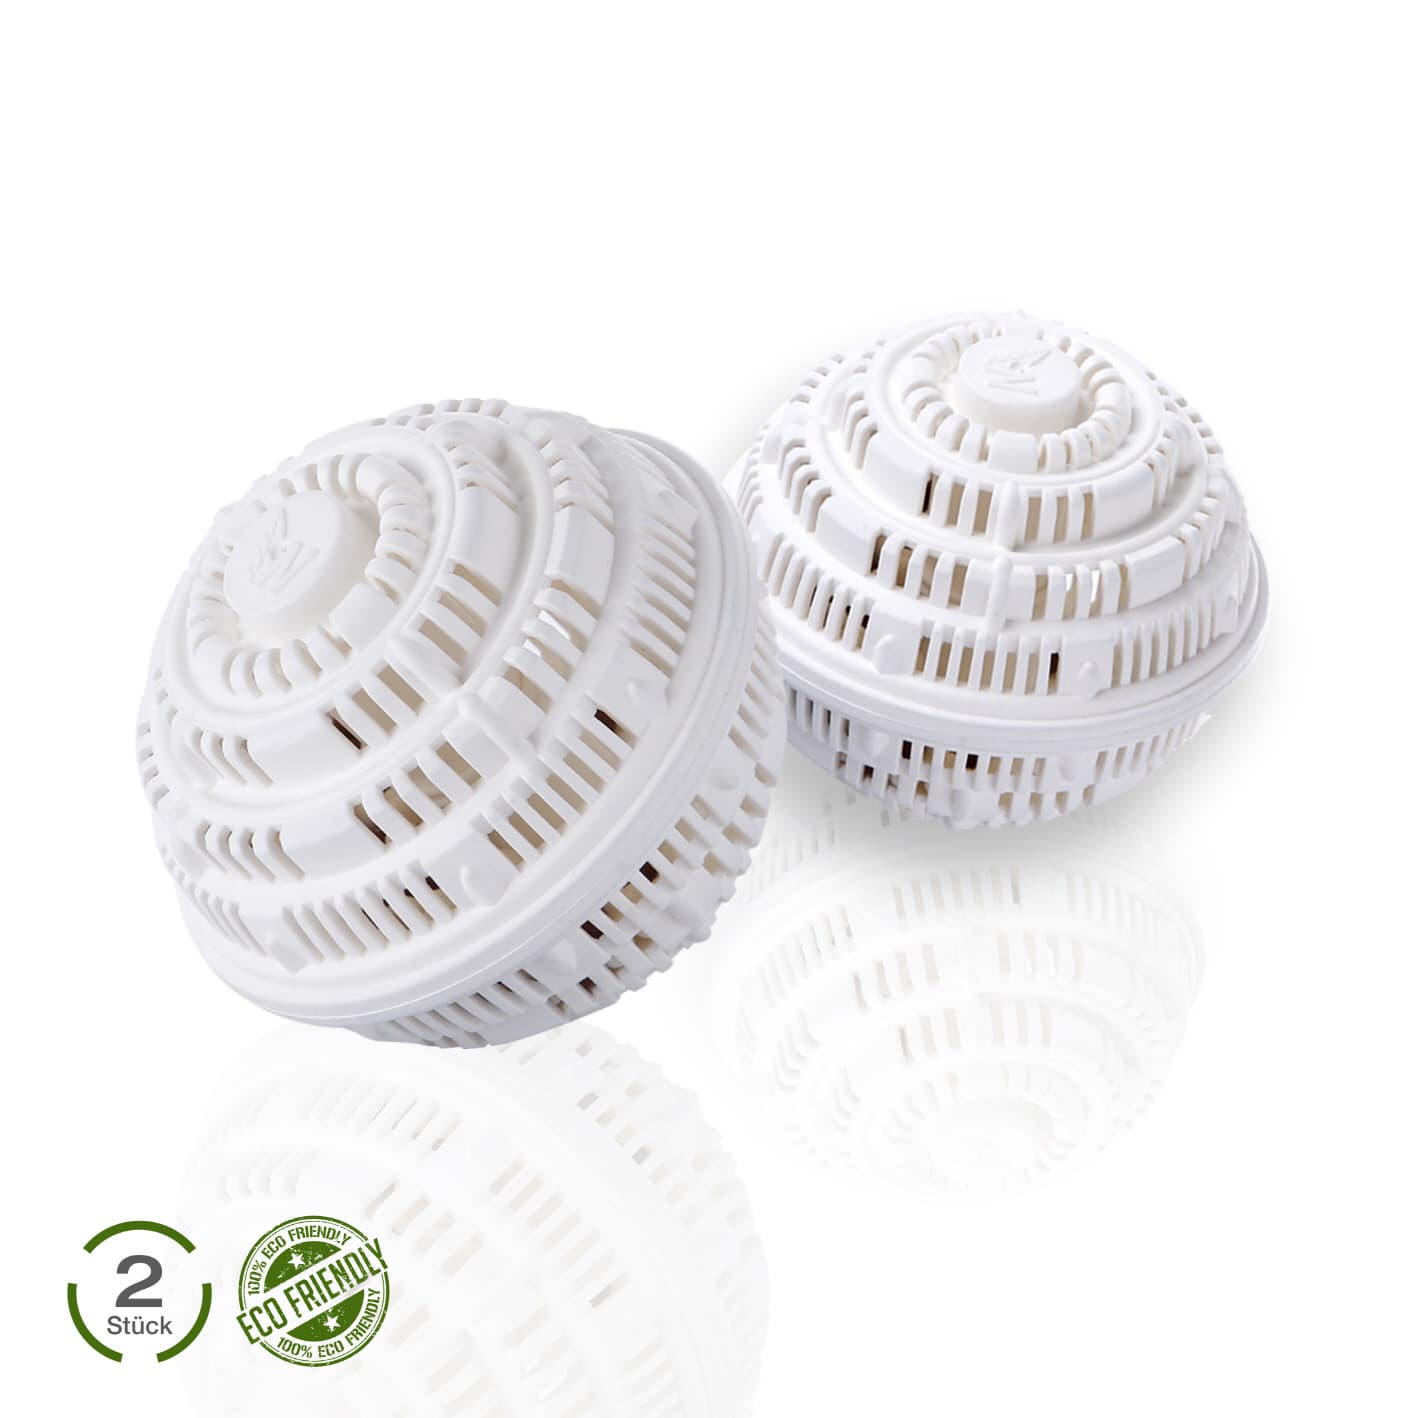 Eco Hi_Ball Power Clean for Laundry